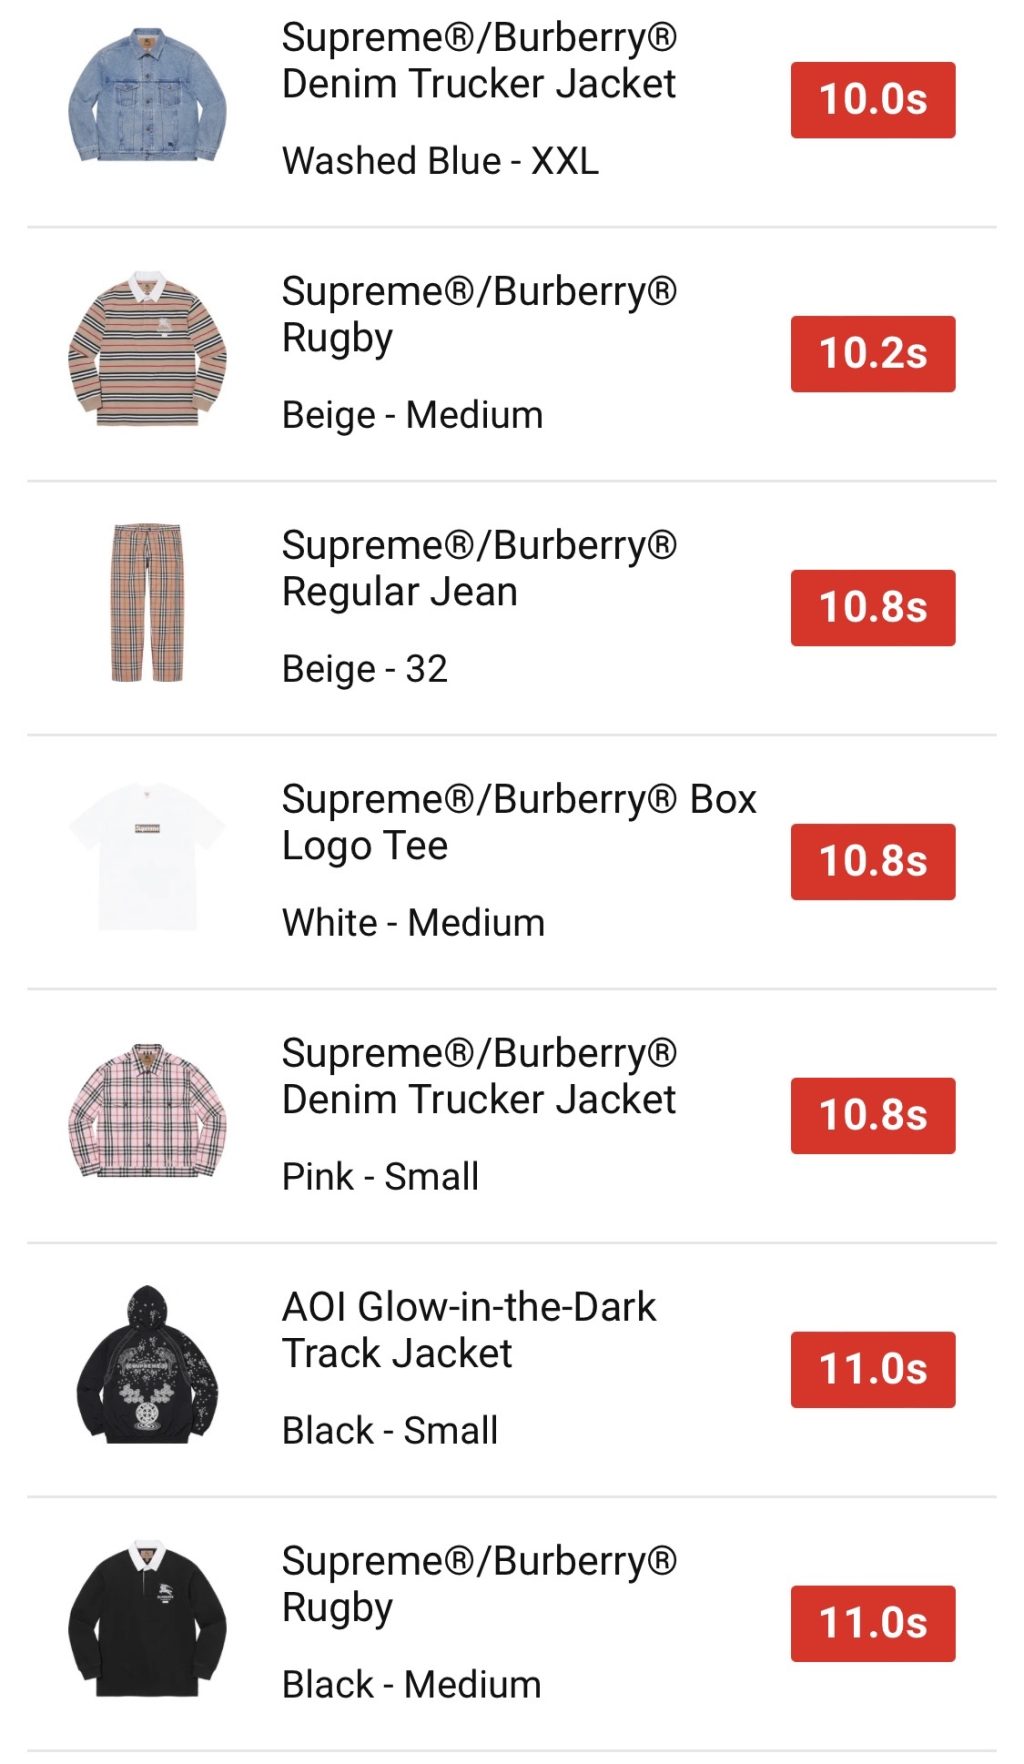 Supreme 公式通販サイトで3月12日 Week3に発売予定の新作アイテム 